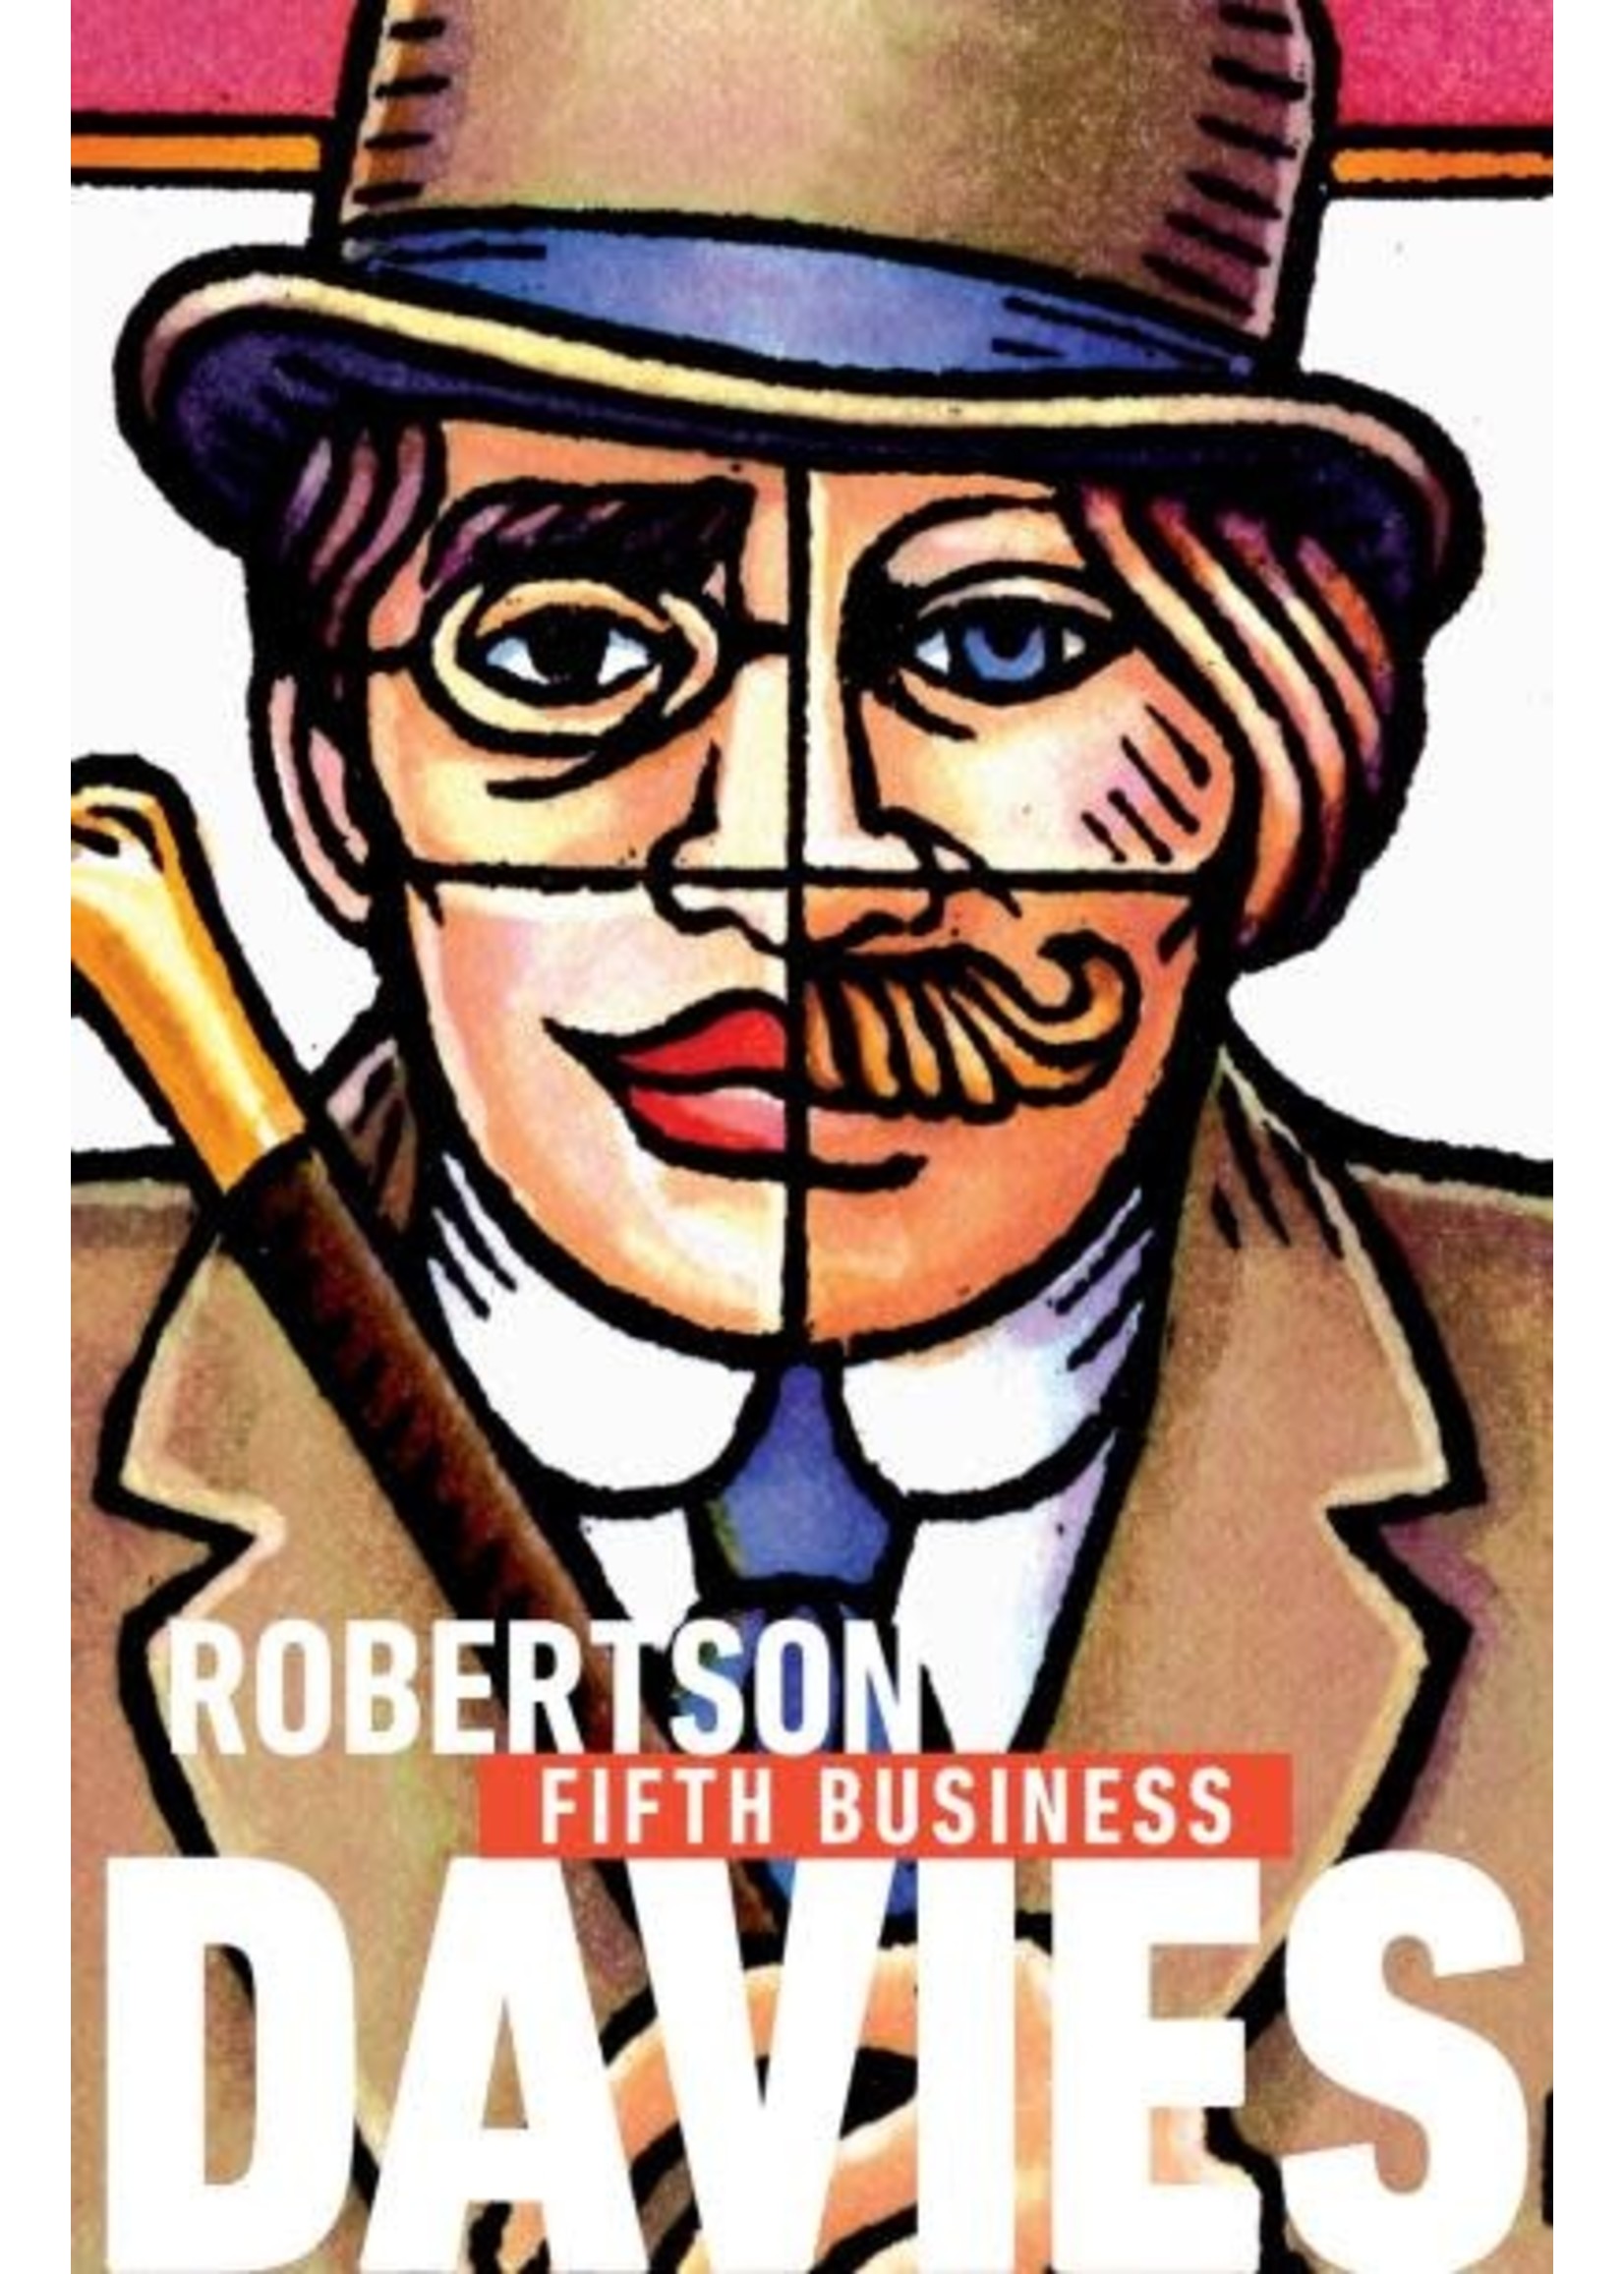 Fifth Business by Robertson Davies